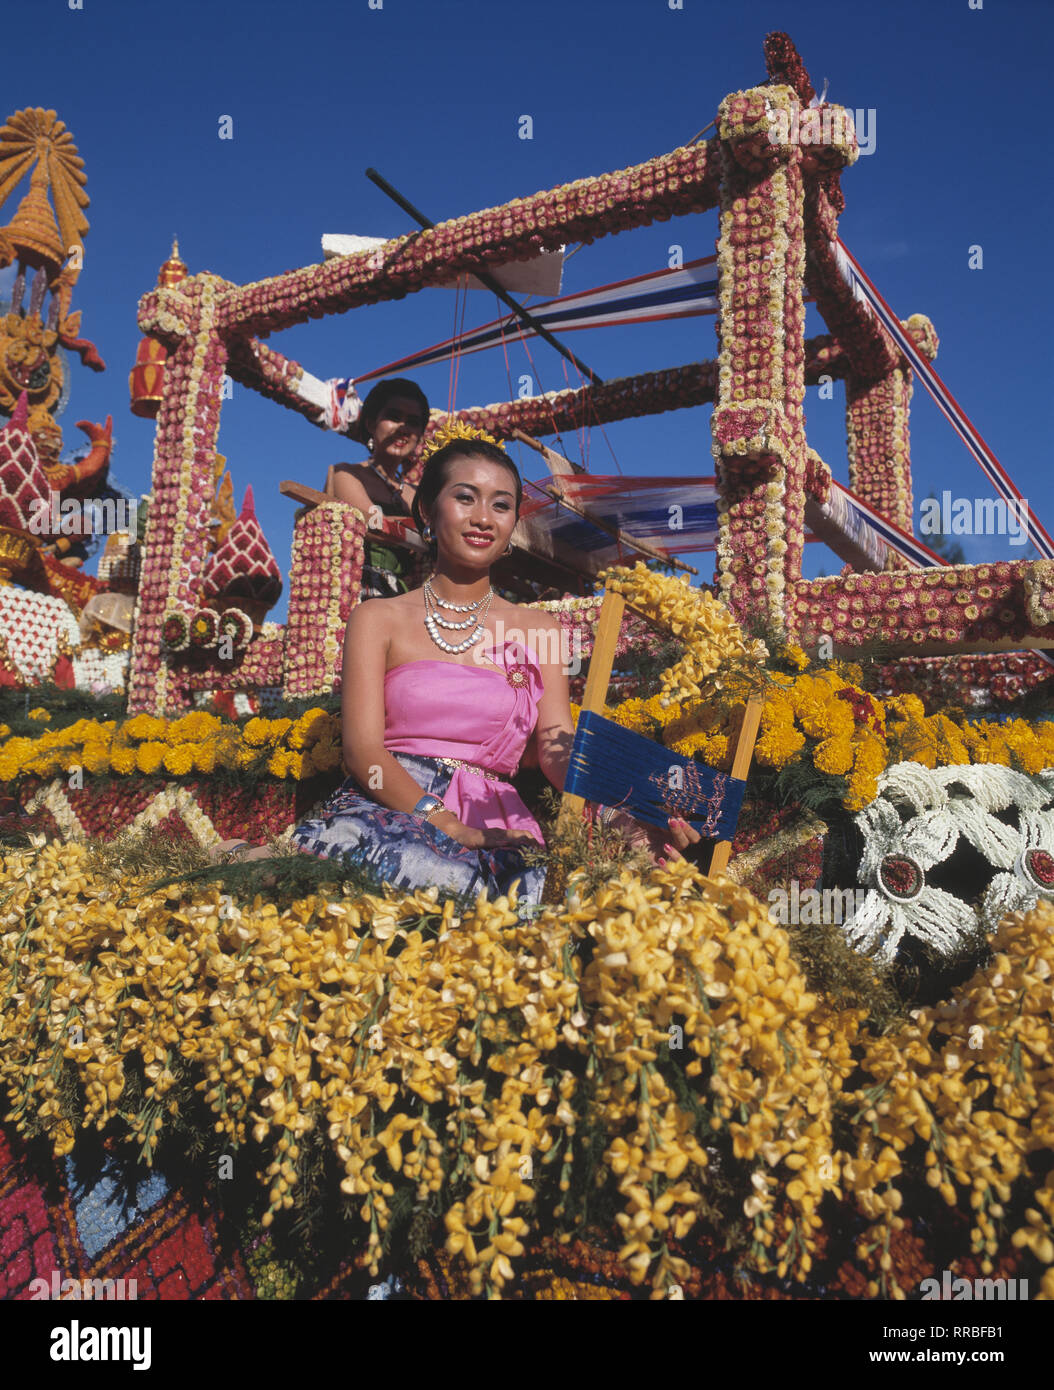 Thailand. Bangkok. Silom road festival float. Young woman in traditional costume. Stock Photo